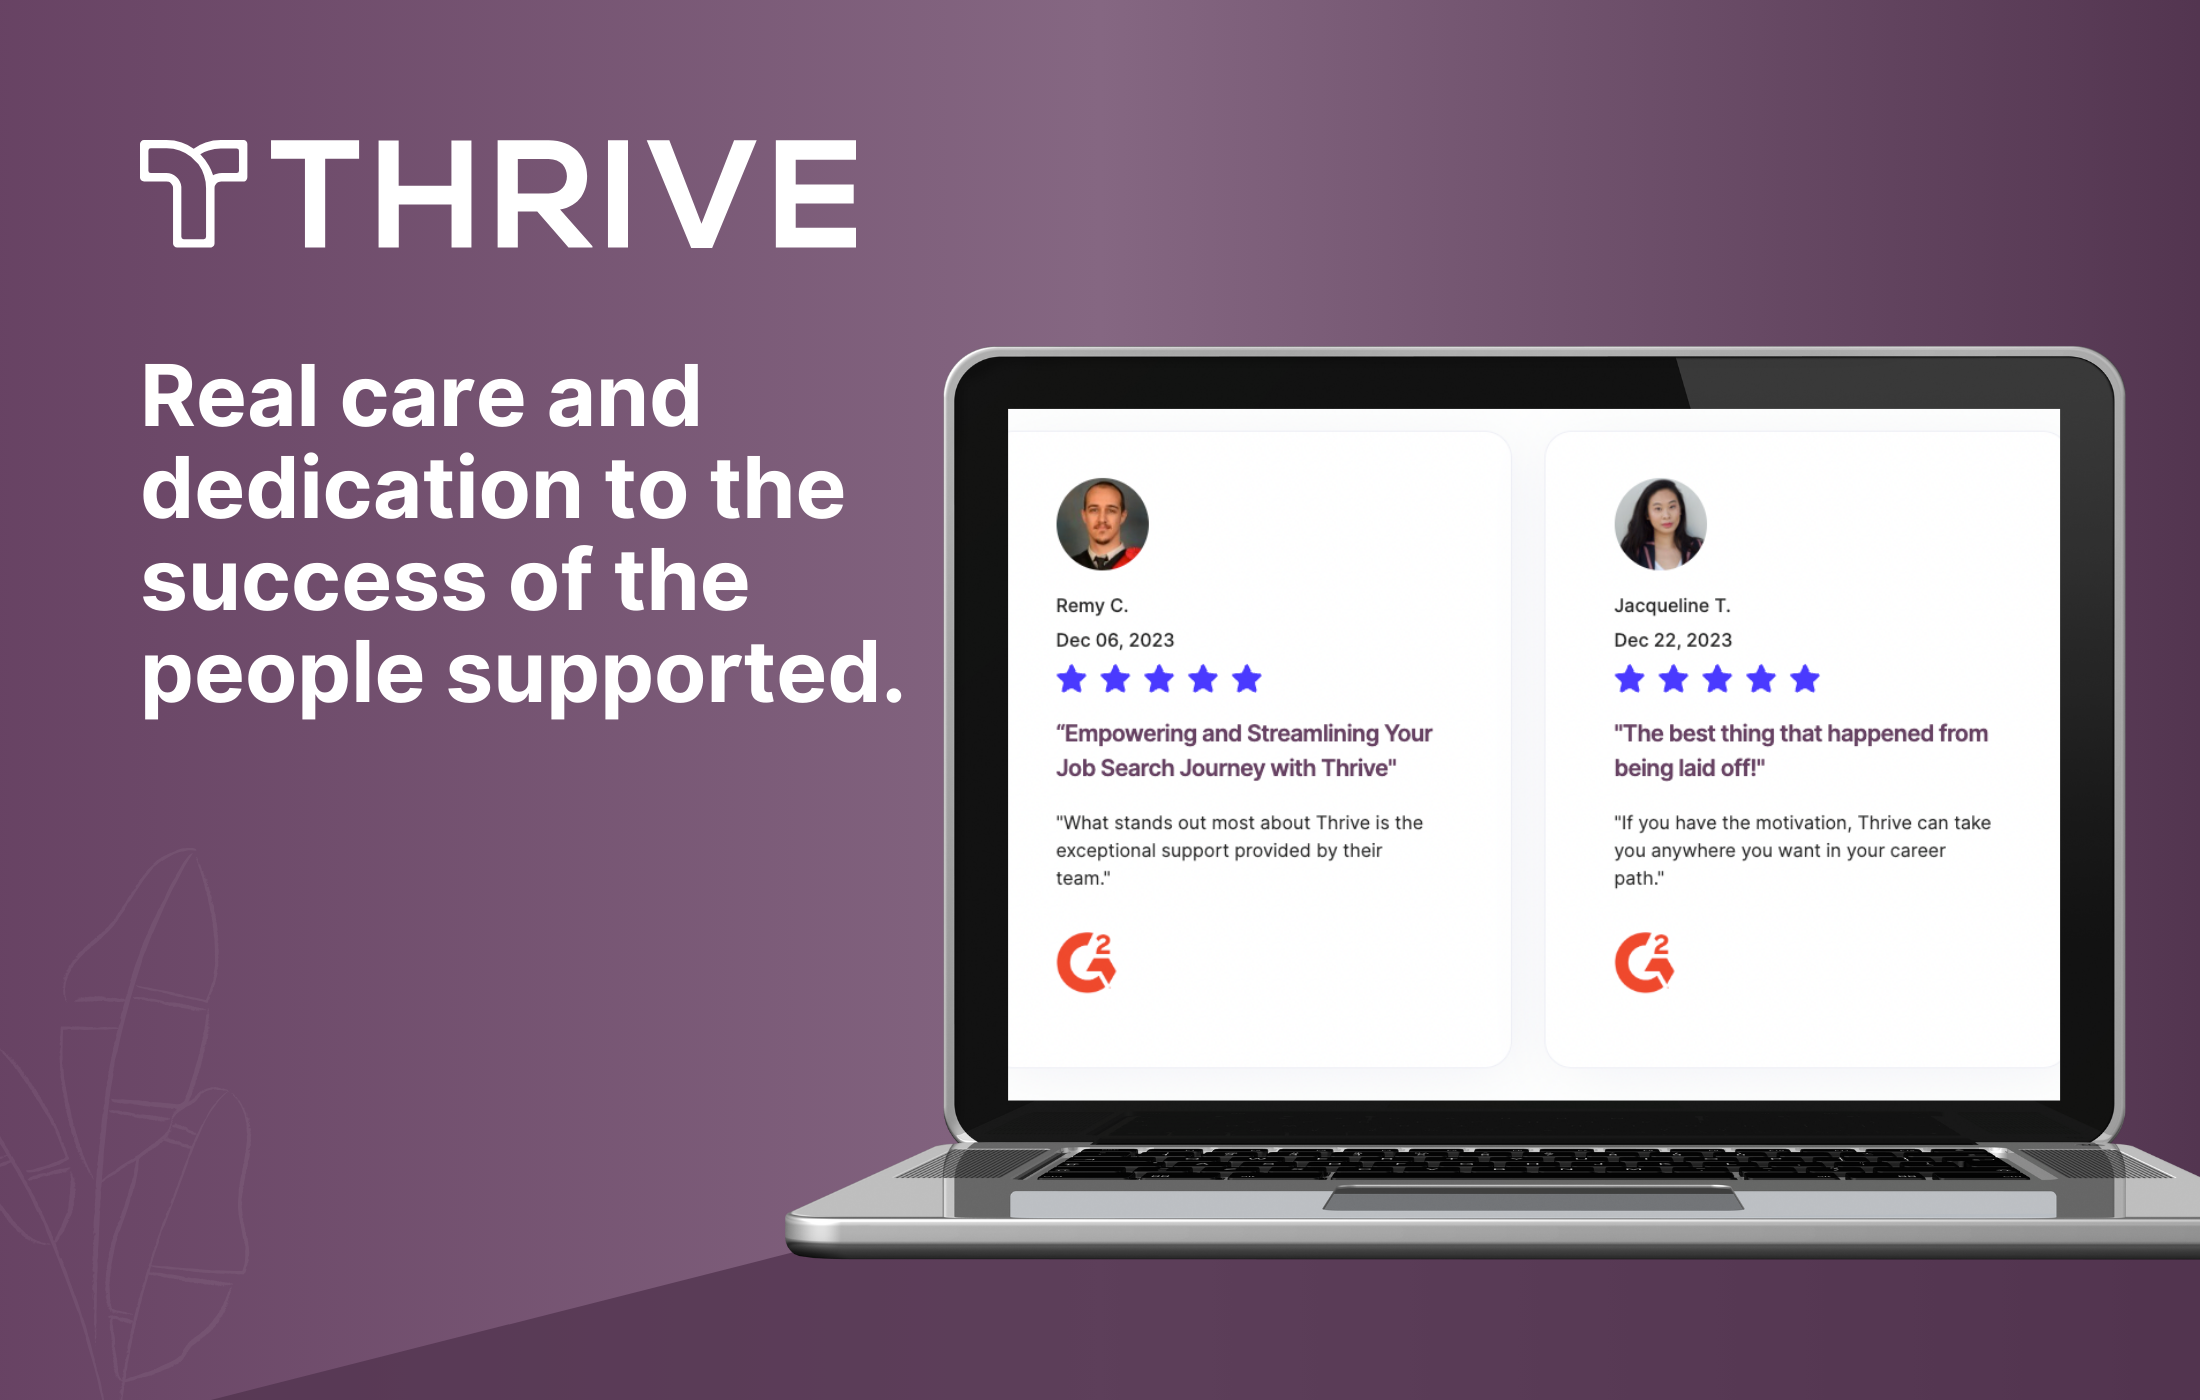 Our approach involves actual care and consideration. Empathy comes first, along with a dedication to the success of the people we support. Our net promoter score is 73, and we are proud to share that our user satisfaction is over 95% on average.